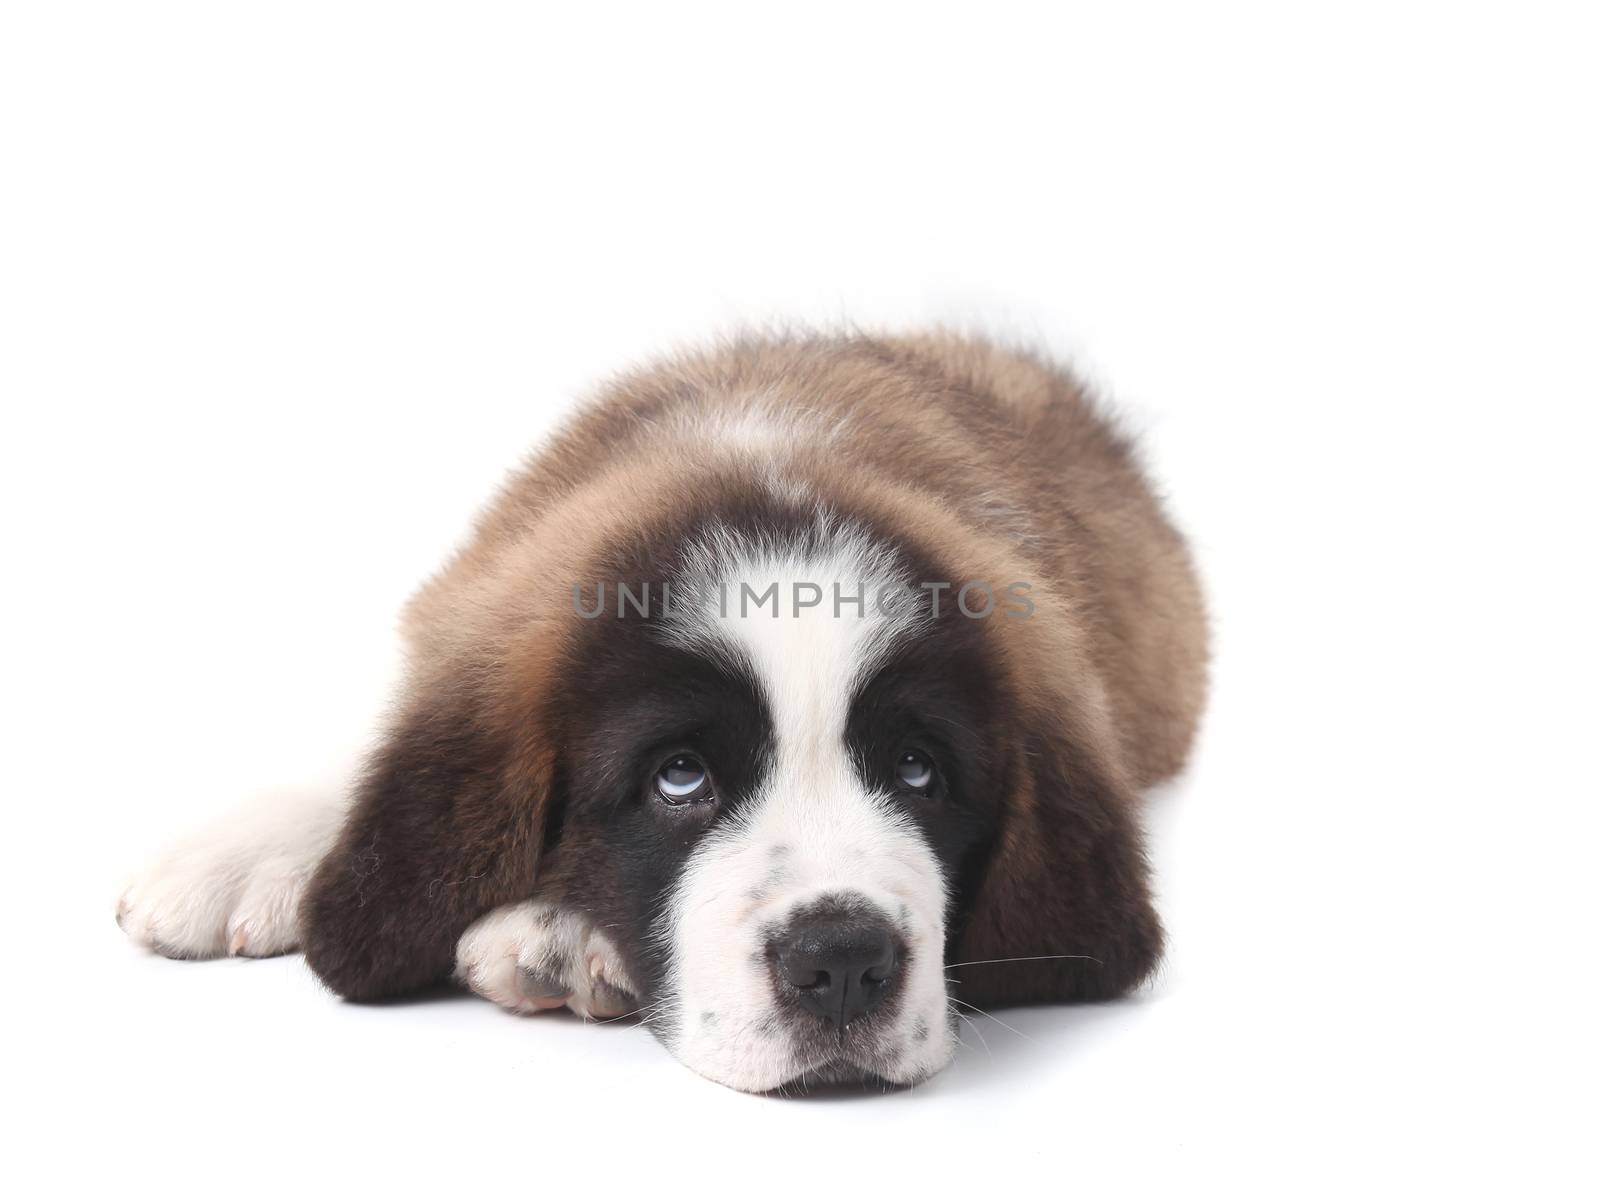 Adorable Young Saint Bernard Puppy on White Background